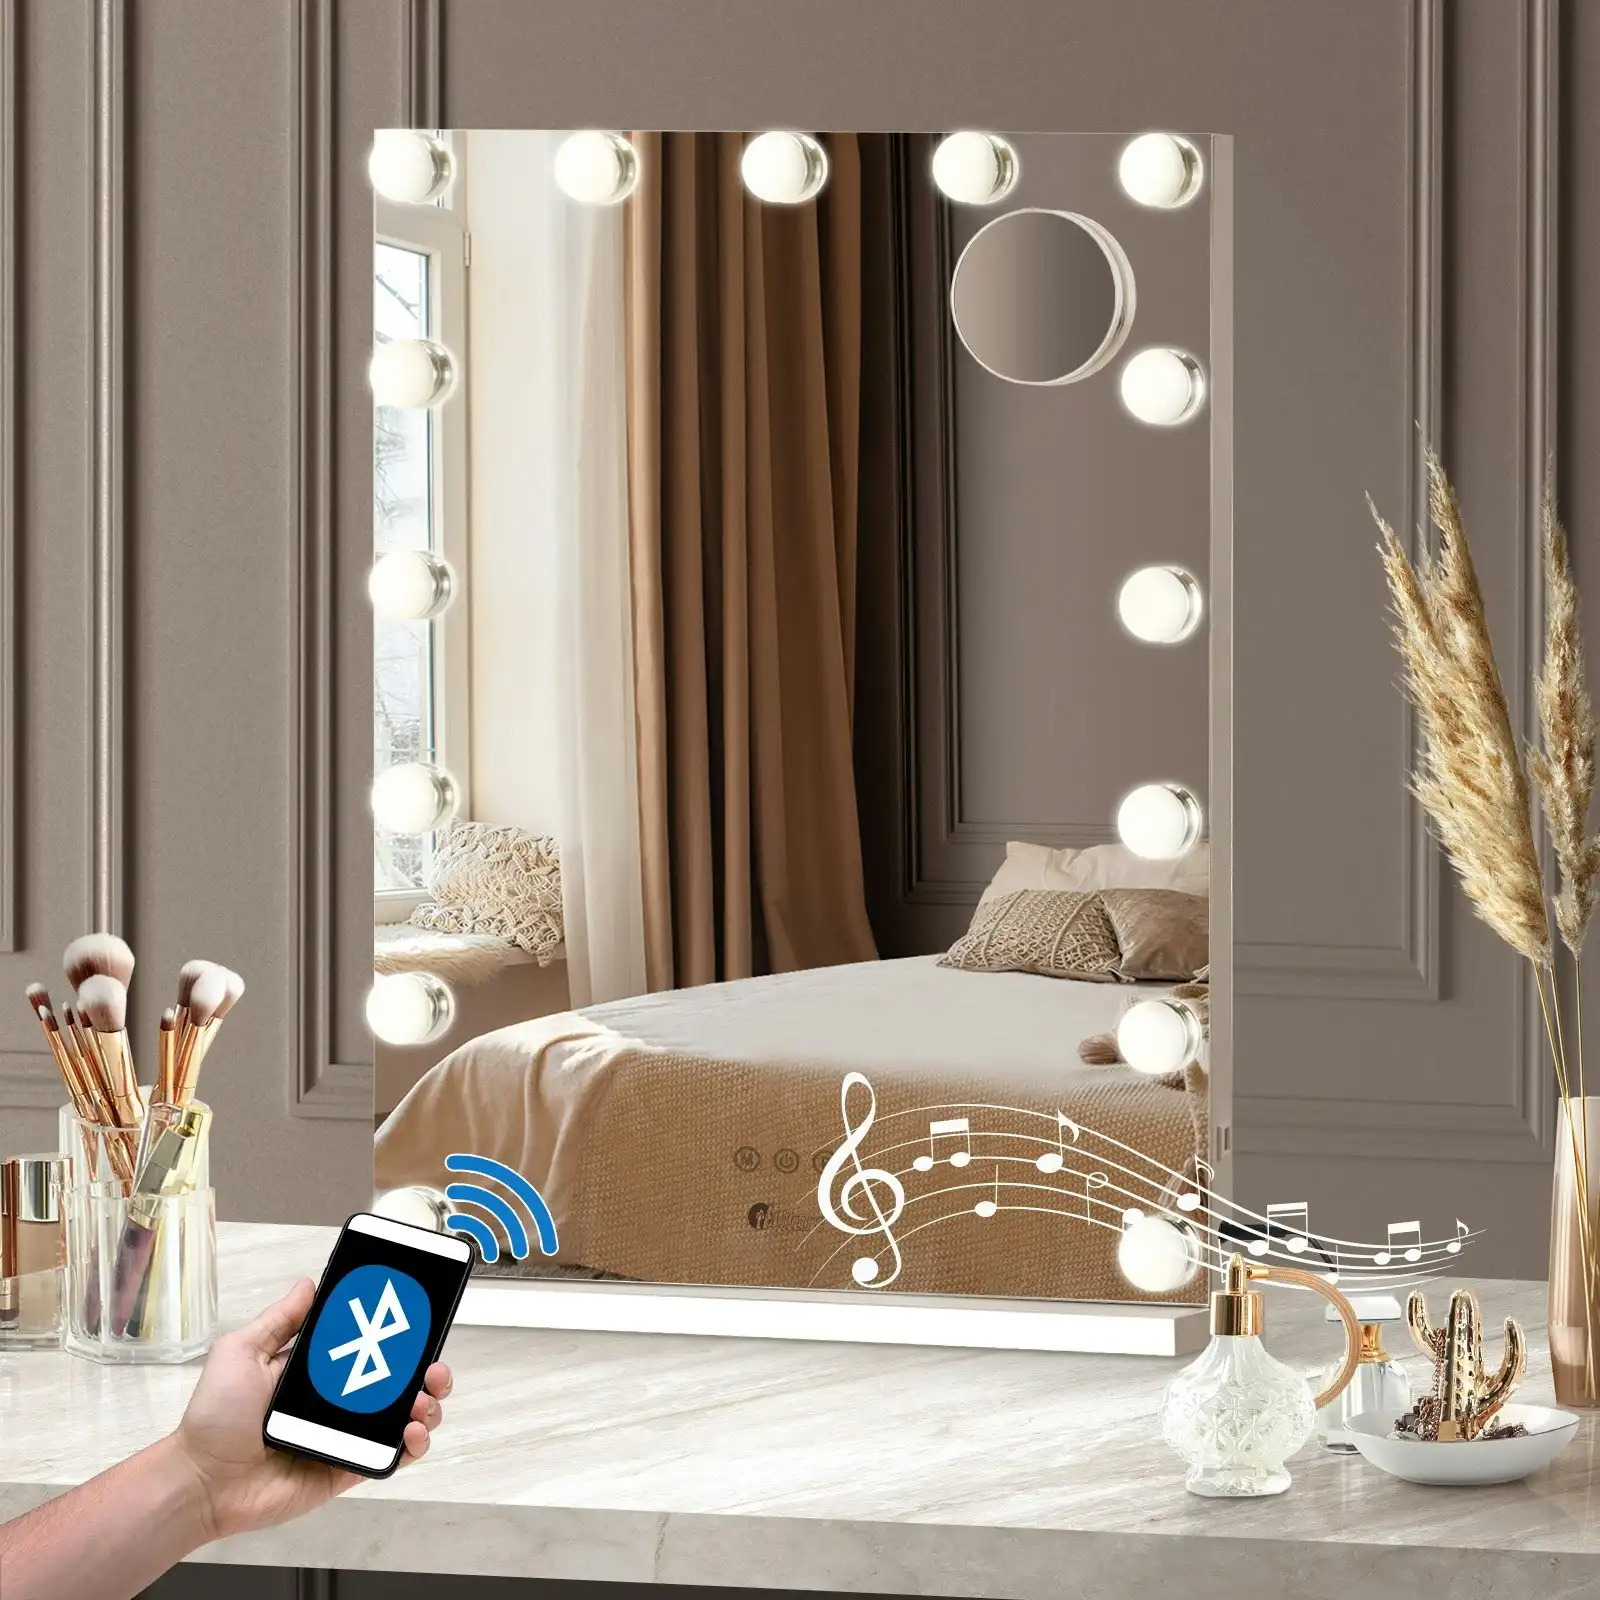 Oikiture 61x43cm LED Makeup Mirror Bluetooth Hollywood Vanity Wall Mirrors Standing Wall Mounted